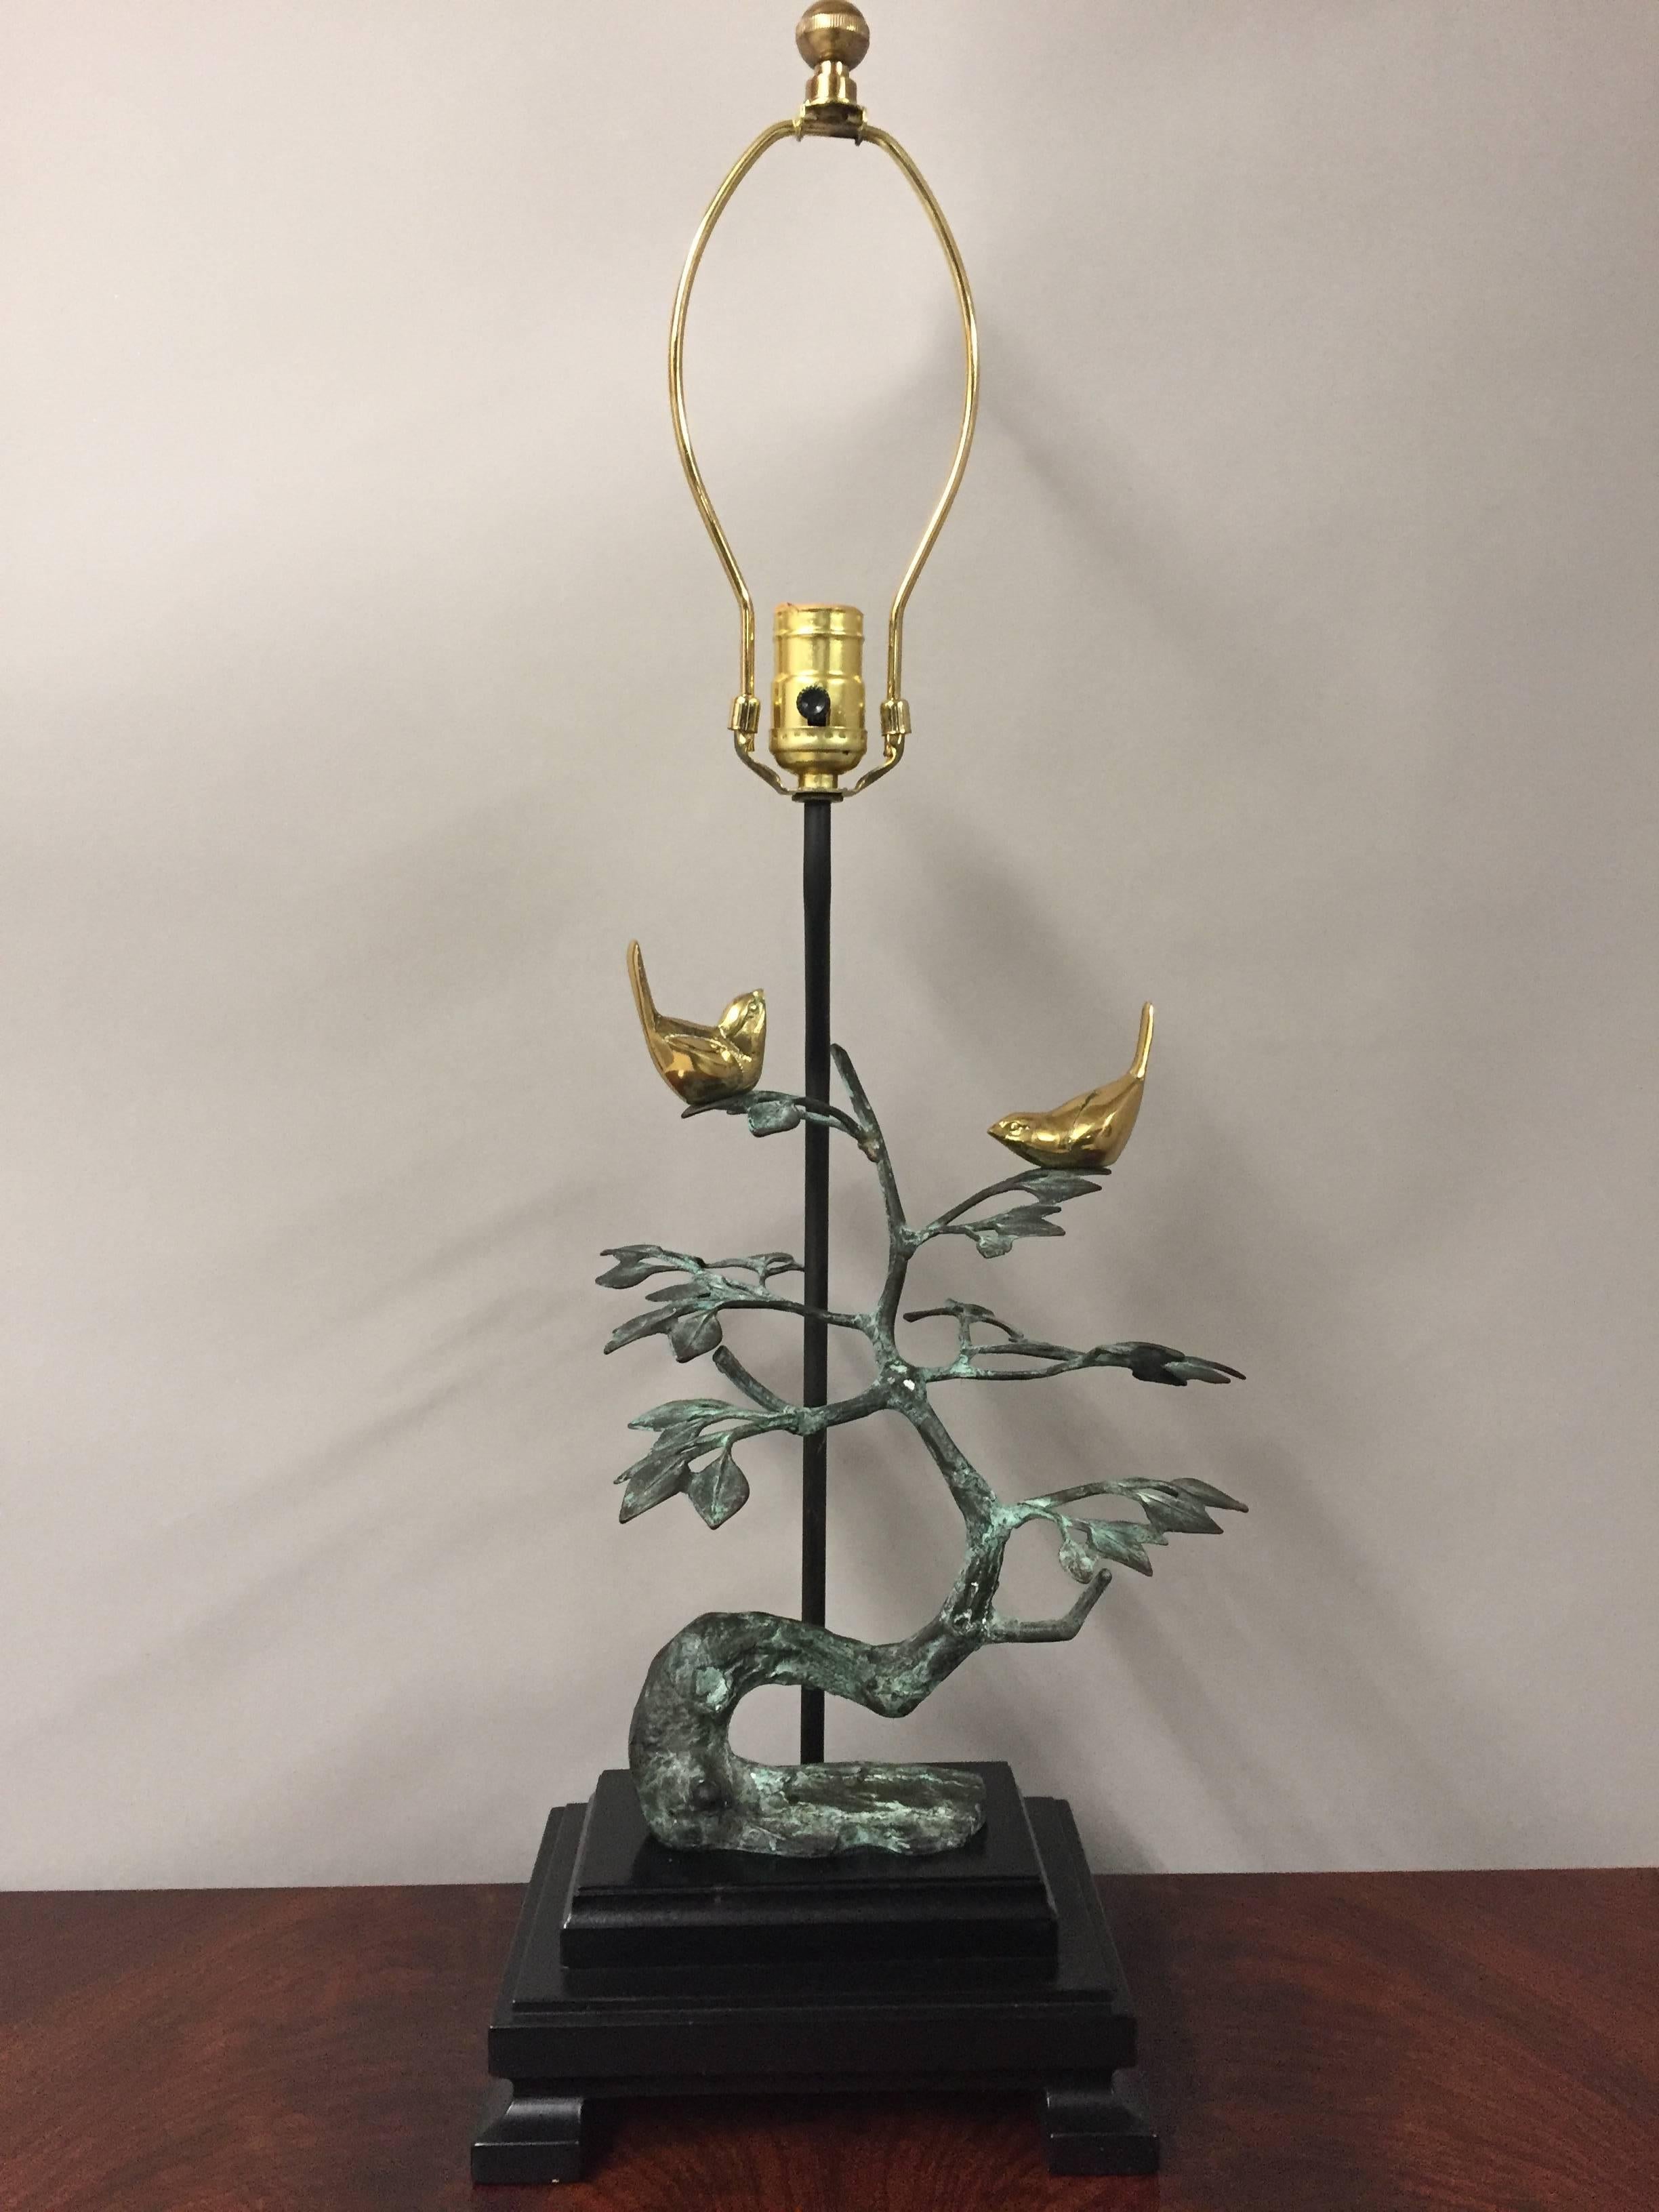 A lovely sculptural table lamp having a verdigris bronze stylized tree with two brass birds perched on the branches. Base is ebonized wood and shade is custom.